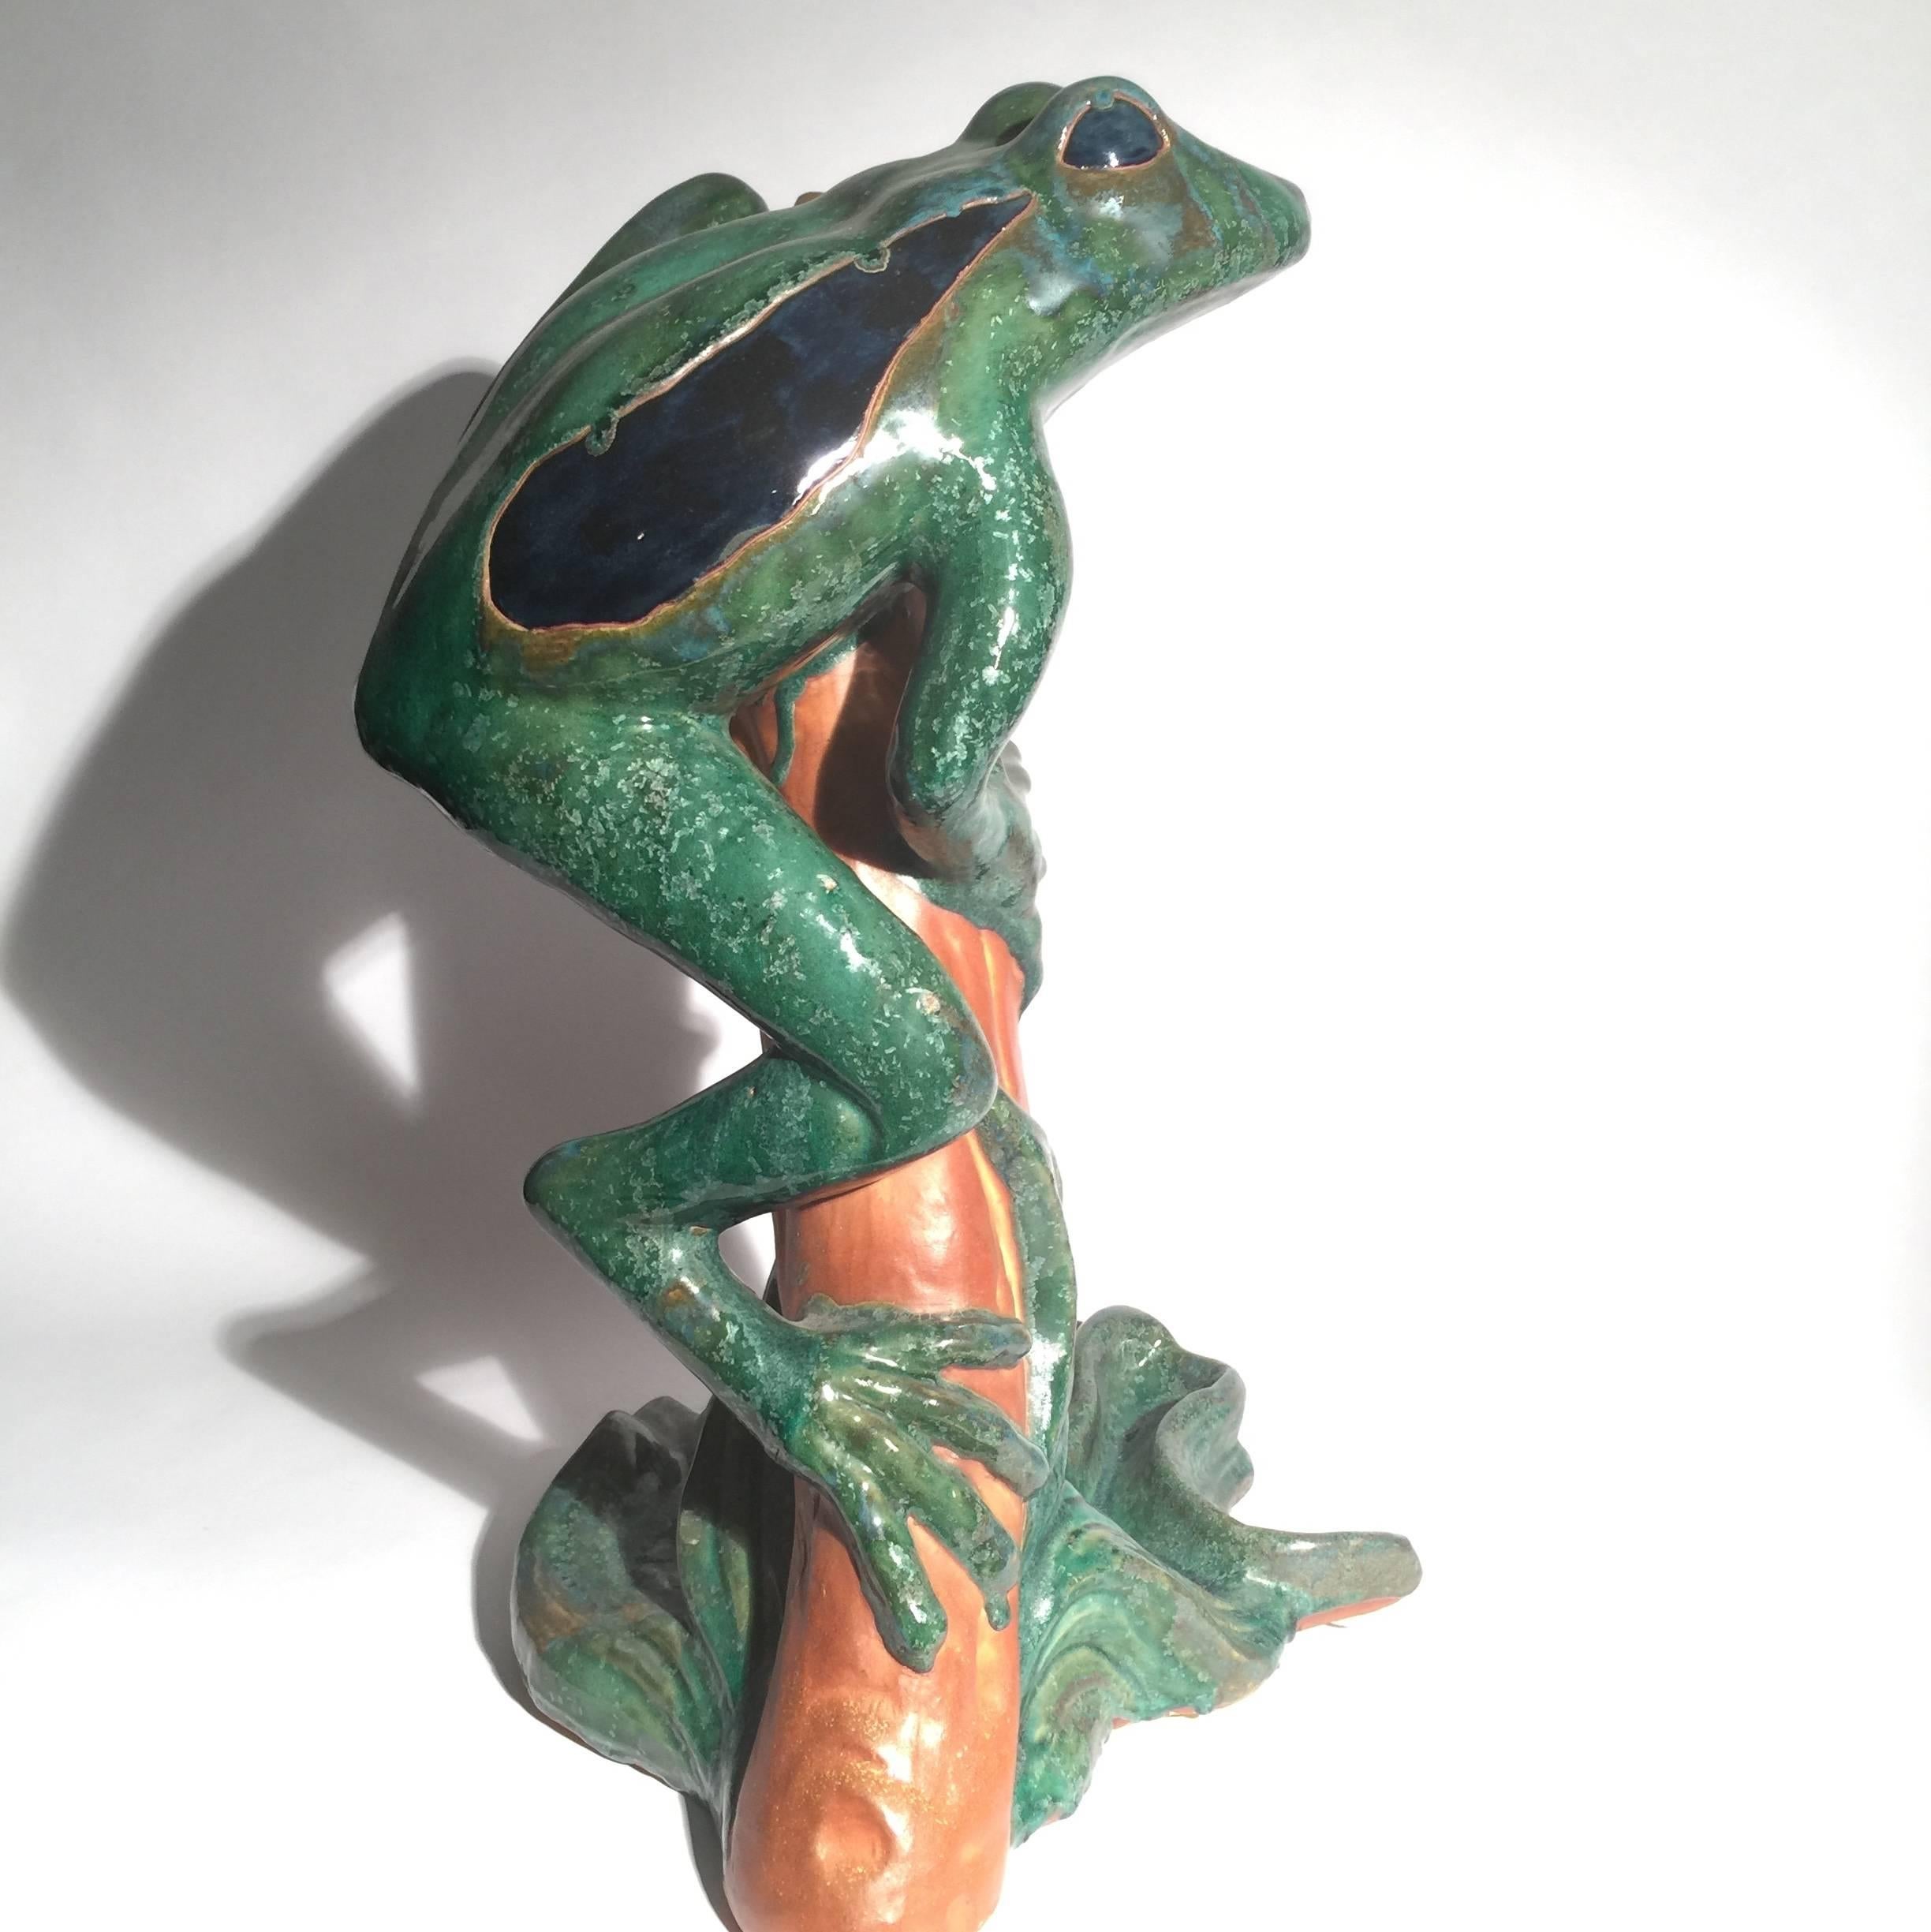 Mid-Century Modern Large Whimsical Midcentury Faience Sculpture of a Frog